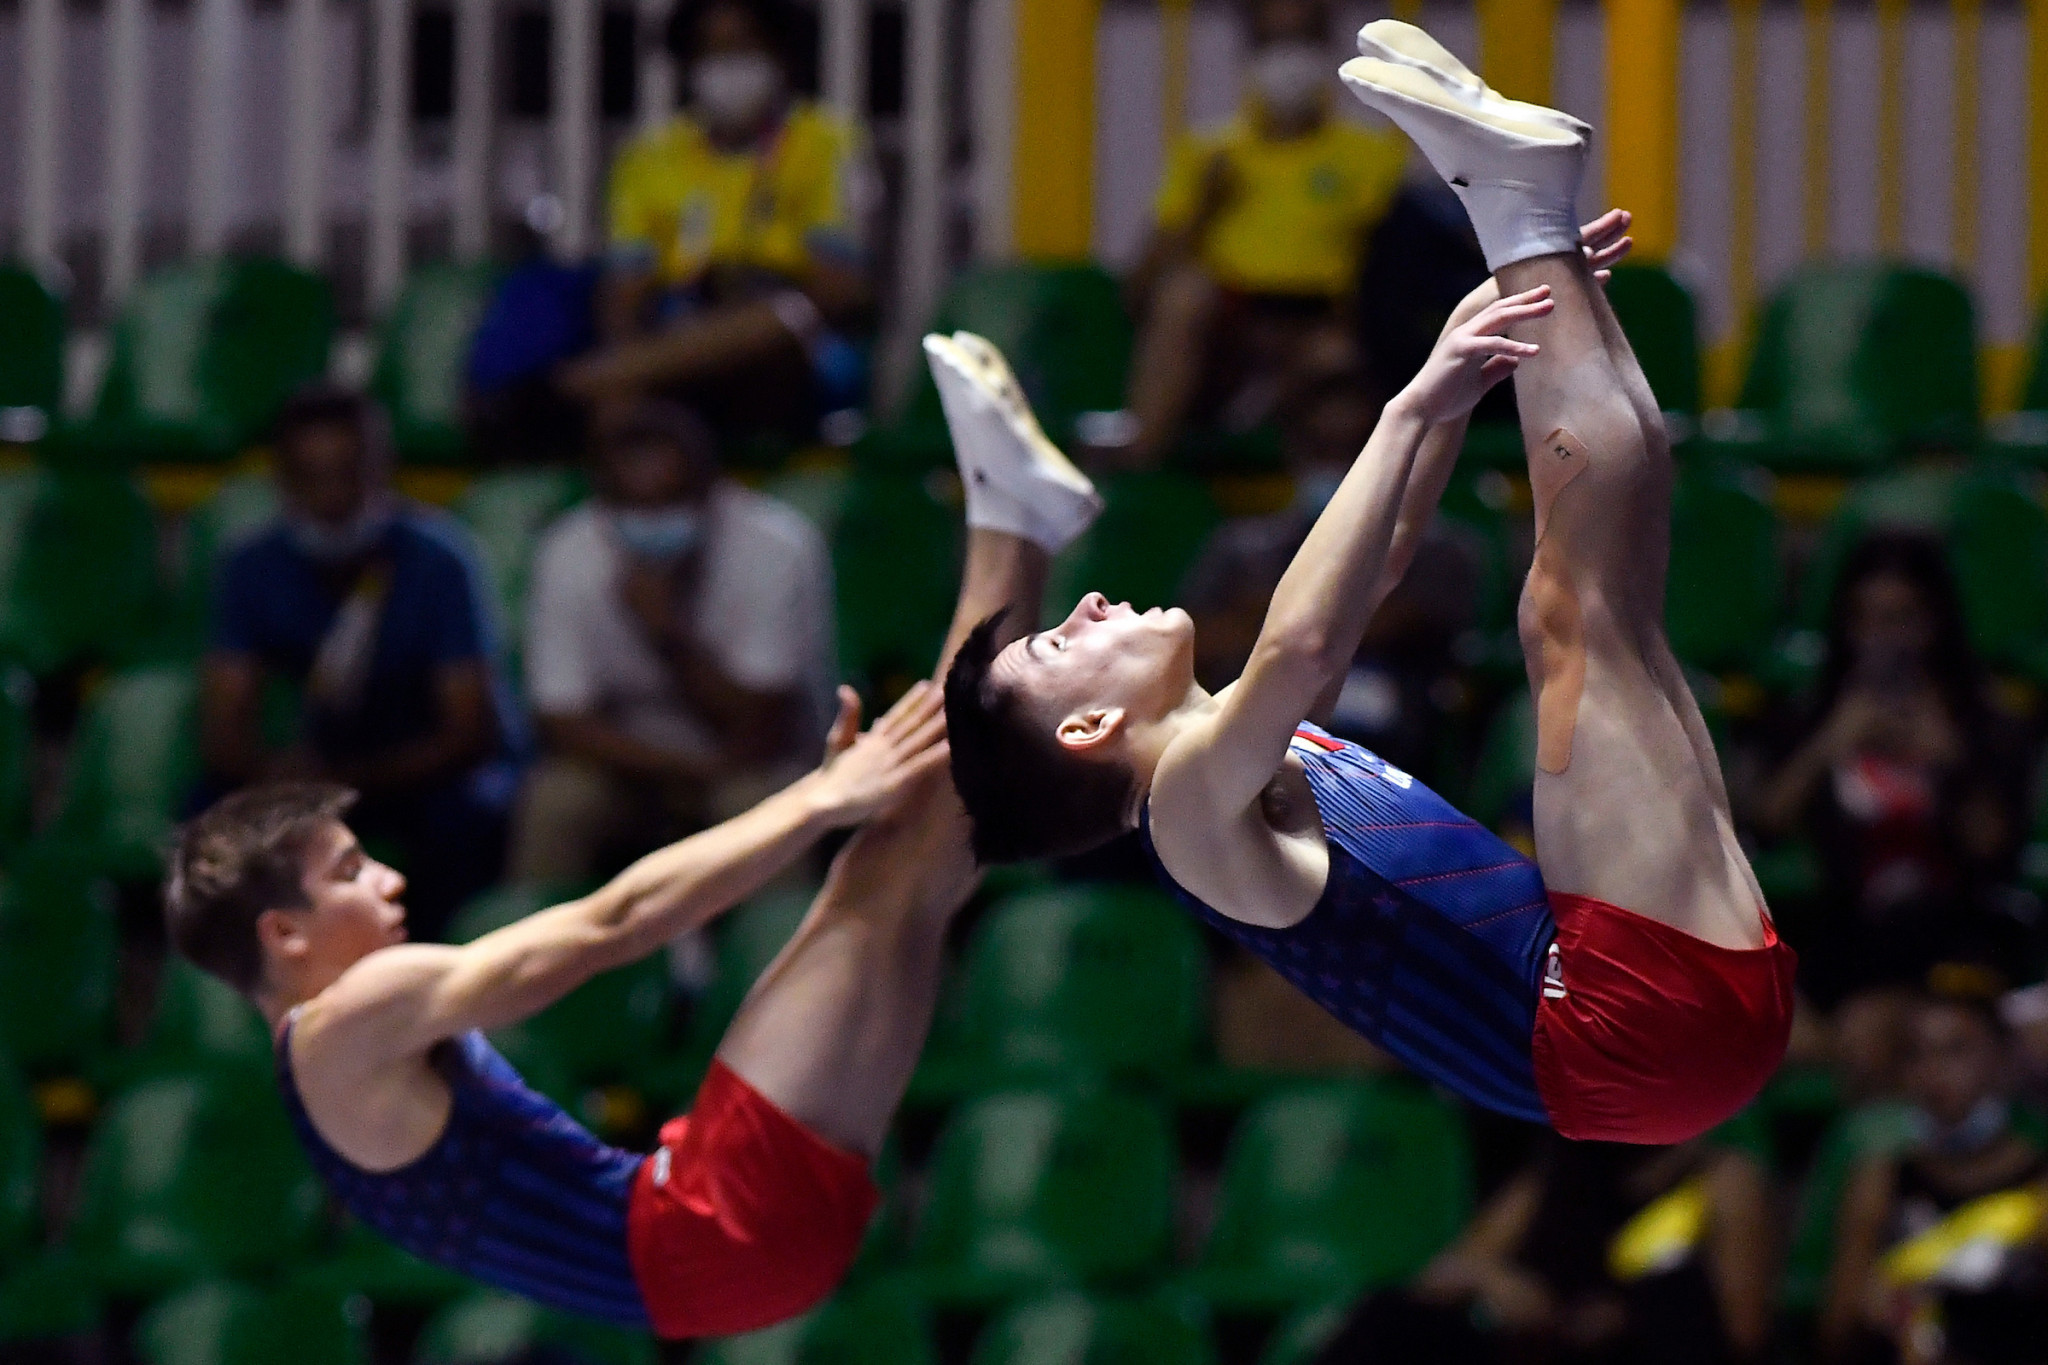 Elijah Vogel and Zachary Ramacci's performance saw the pair win the men's team synchronised trampoline gymnastics event for the United States at the Coliseo El Pueblo ©Agencia.Xpress Media